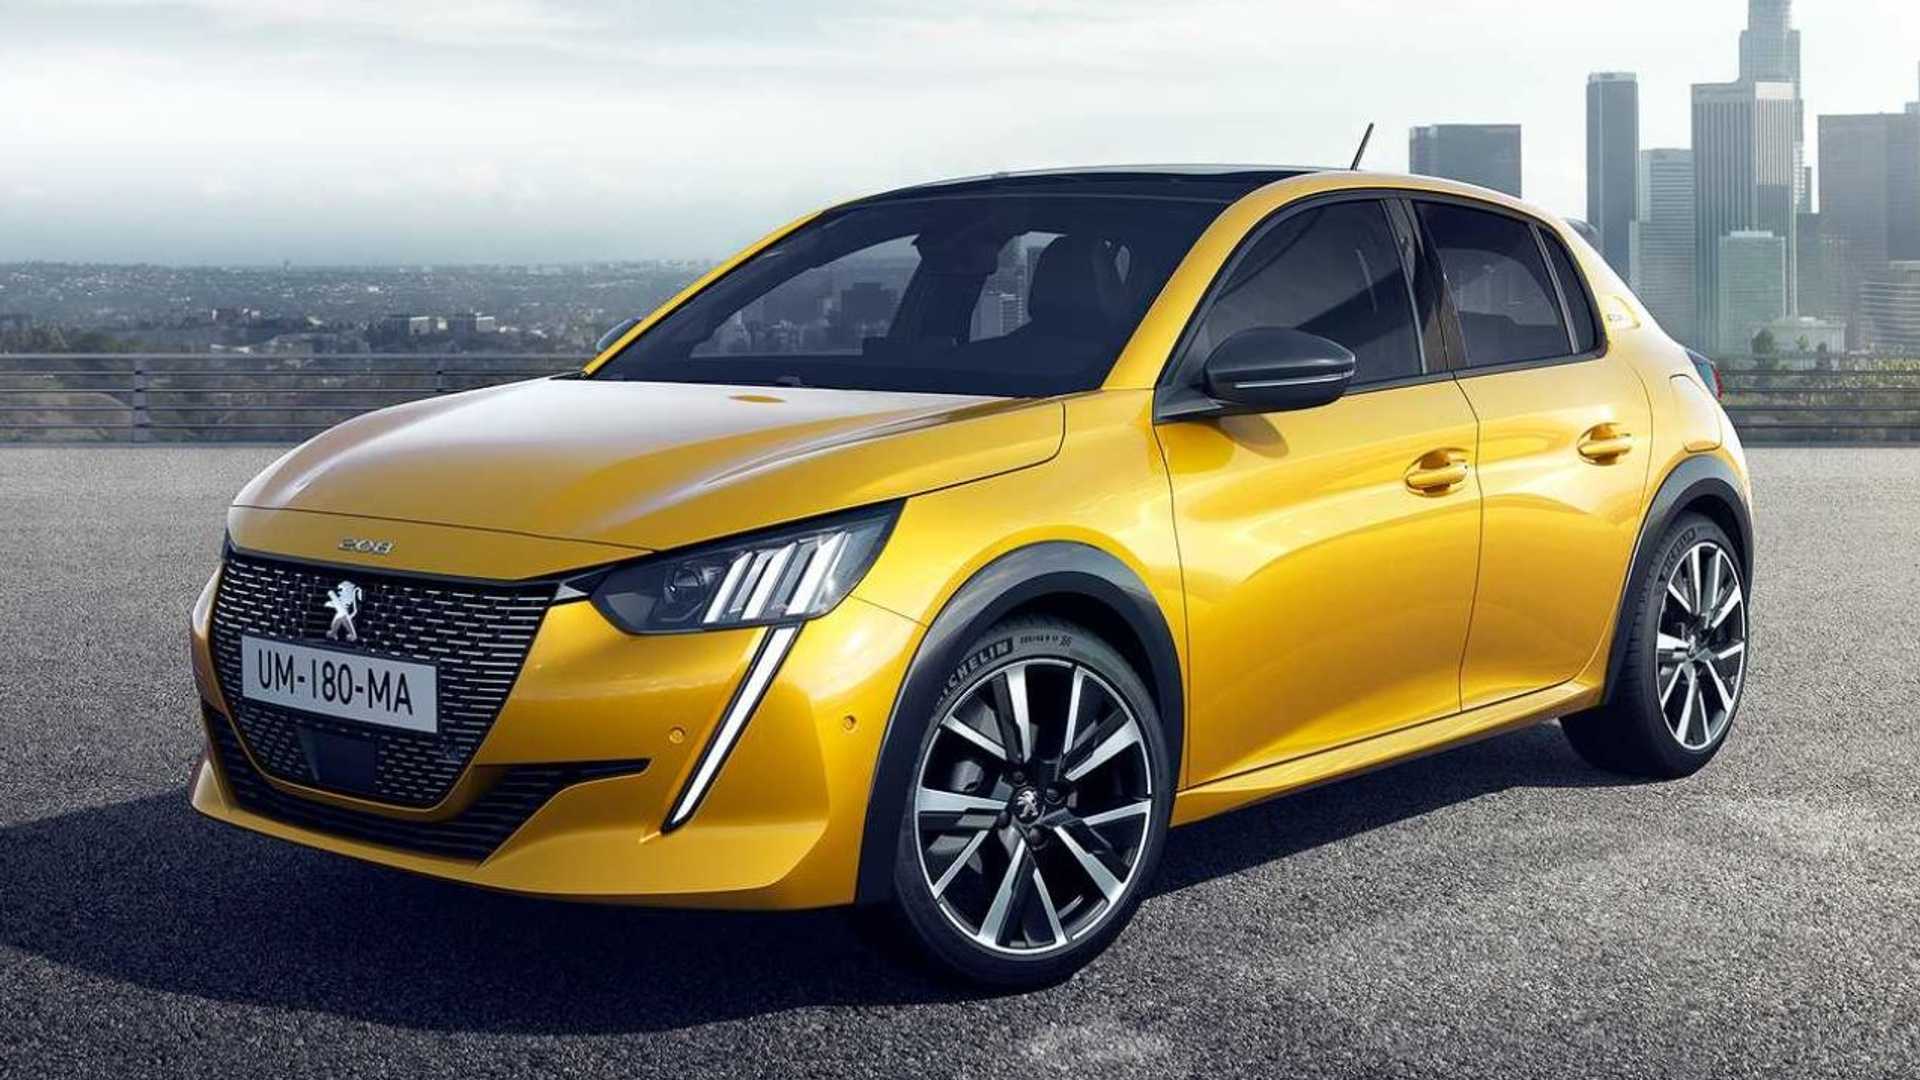 Peugeot 208 revealed with more style and sophistication